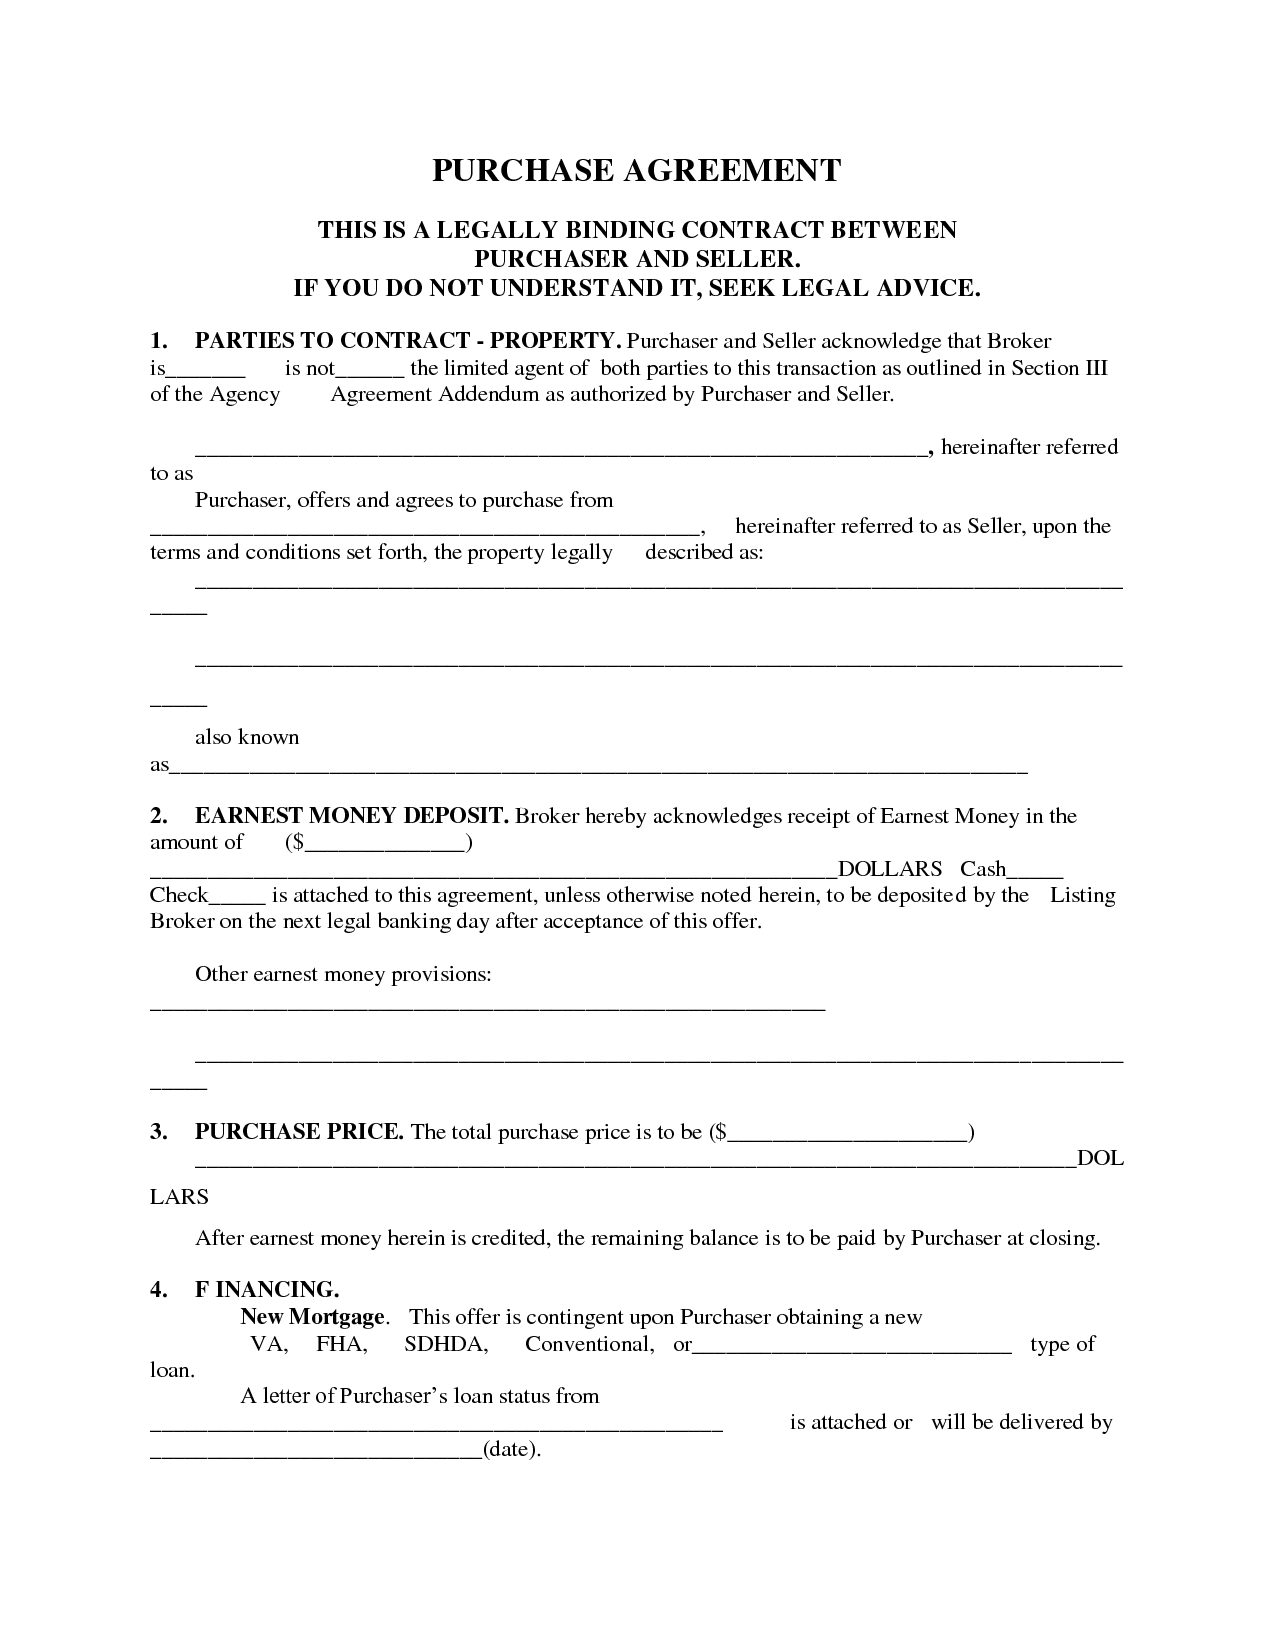 printable-simple-purchase-agreement-template-word